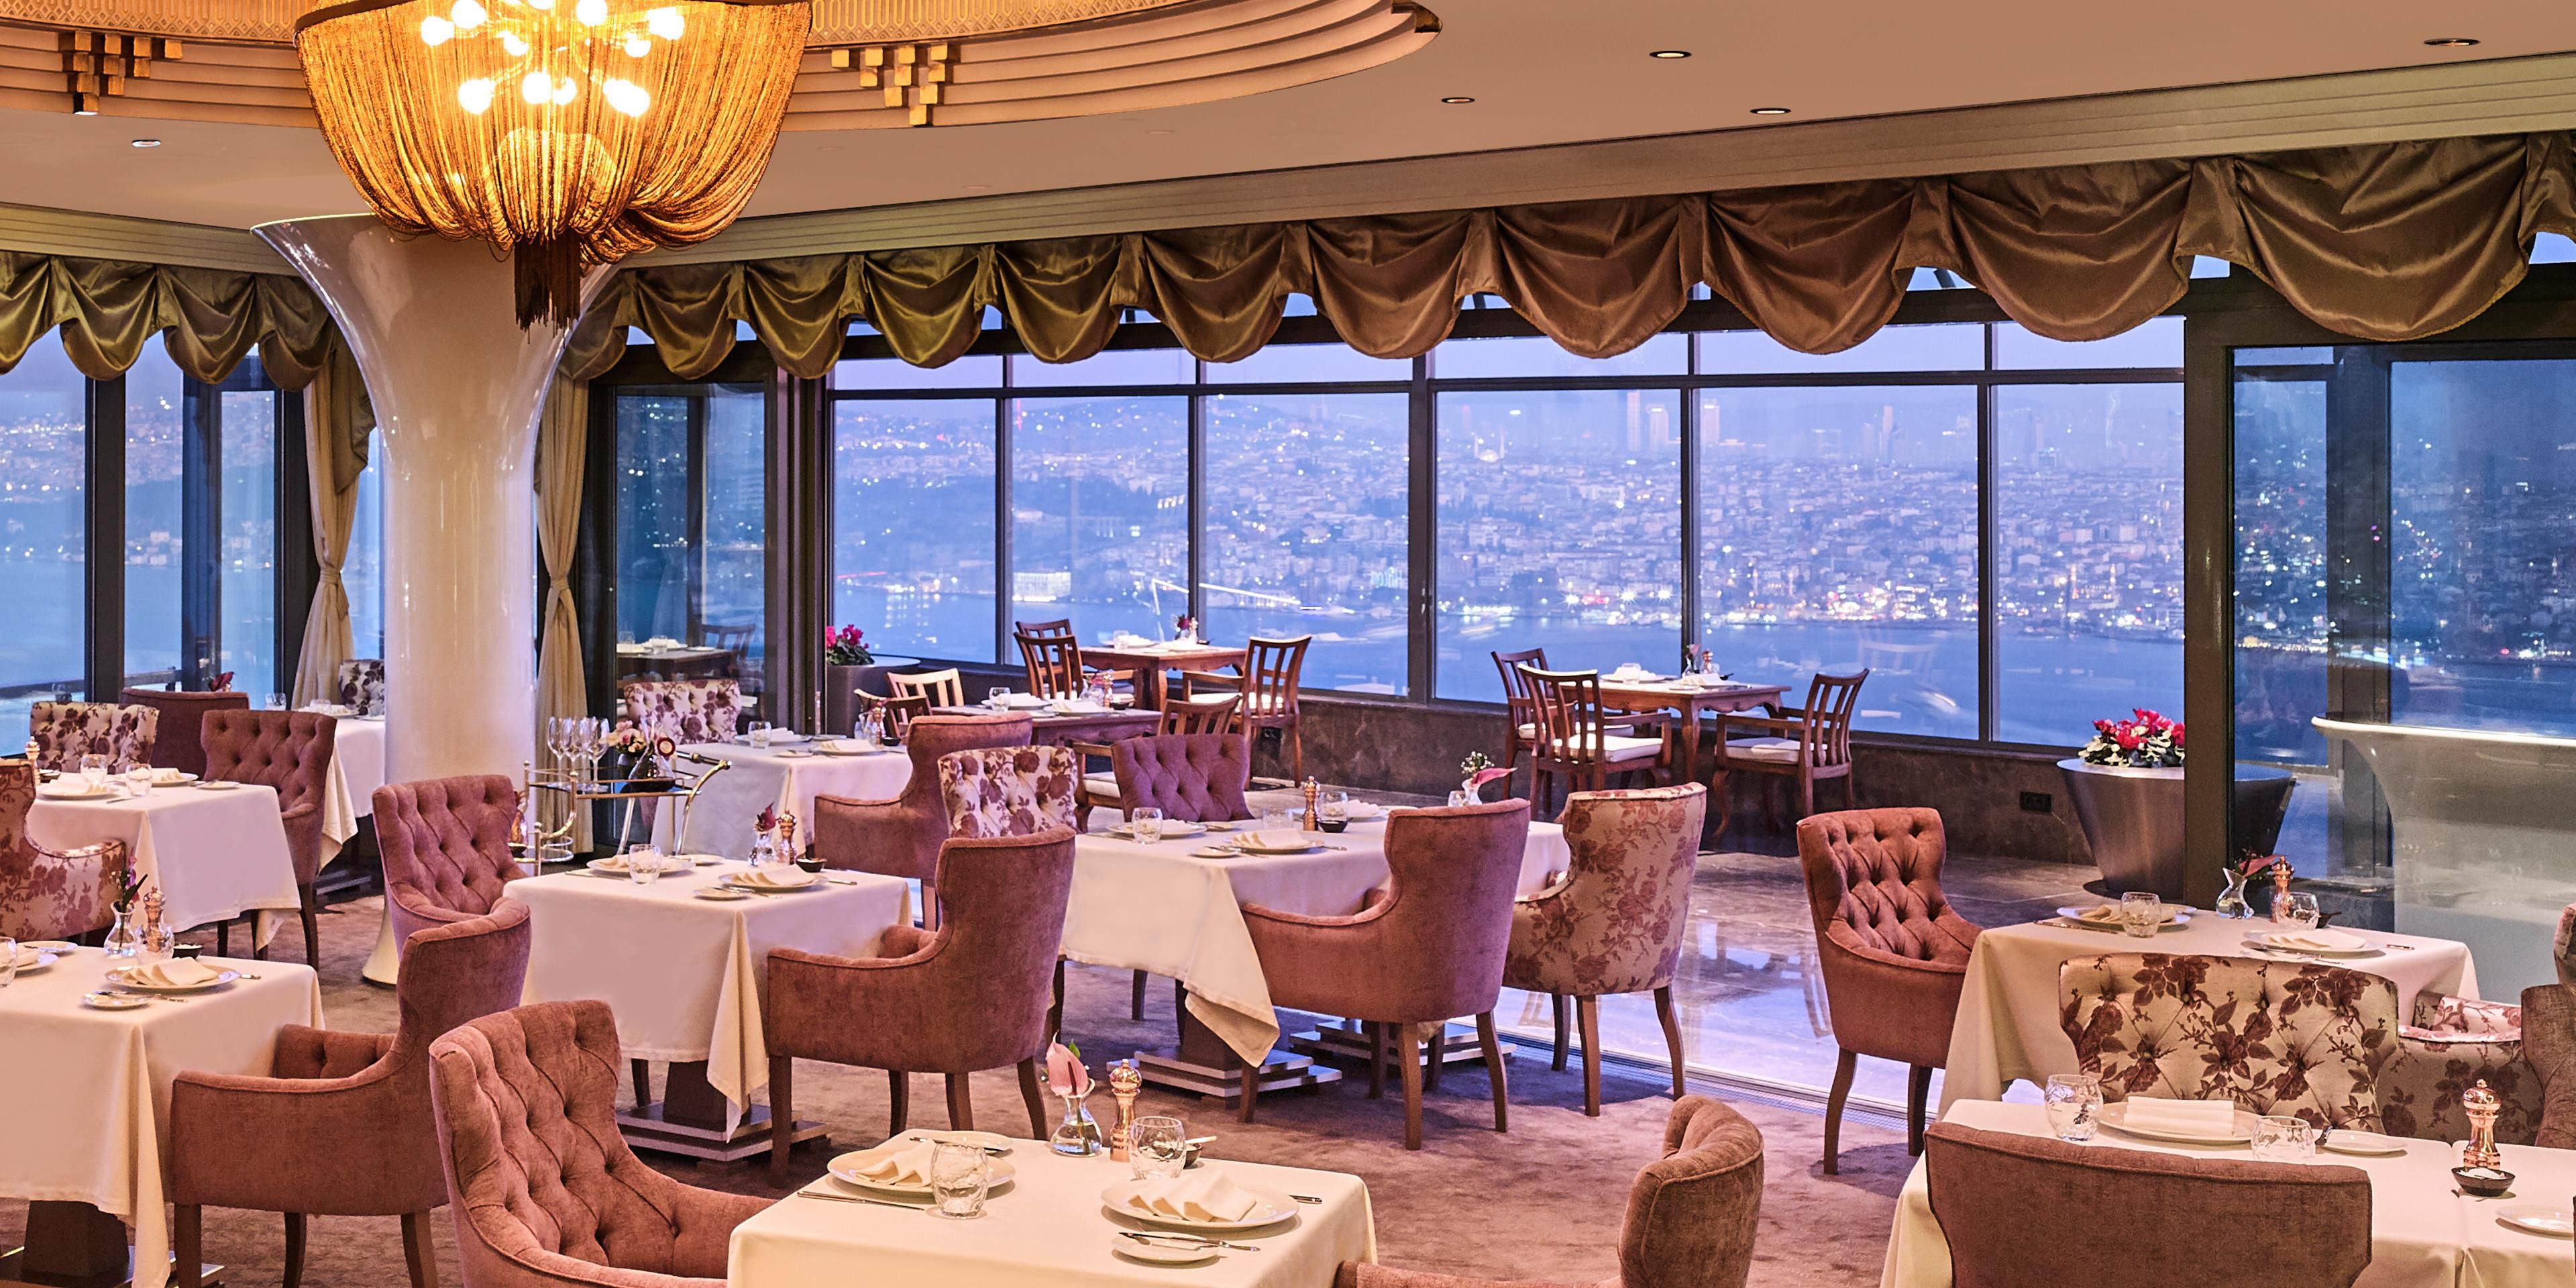 Safran offers the finest in Turkish and Ottoman cuisine and spectacular views of the Bosphorus.